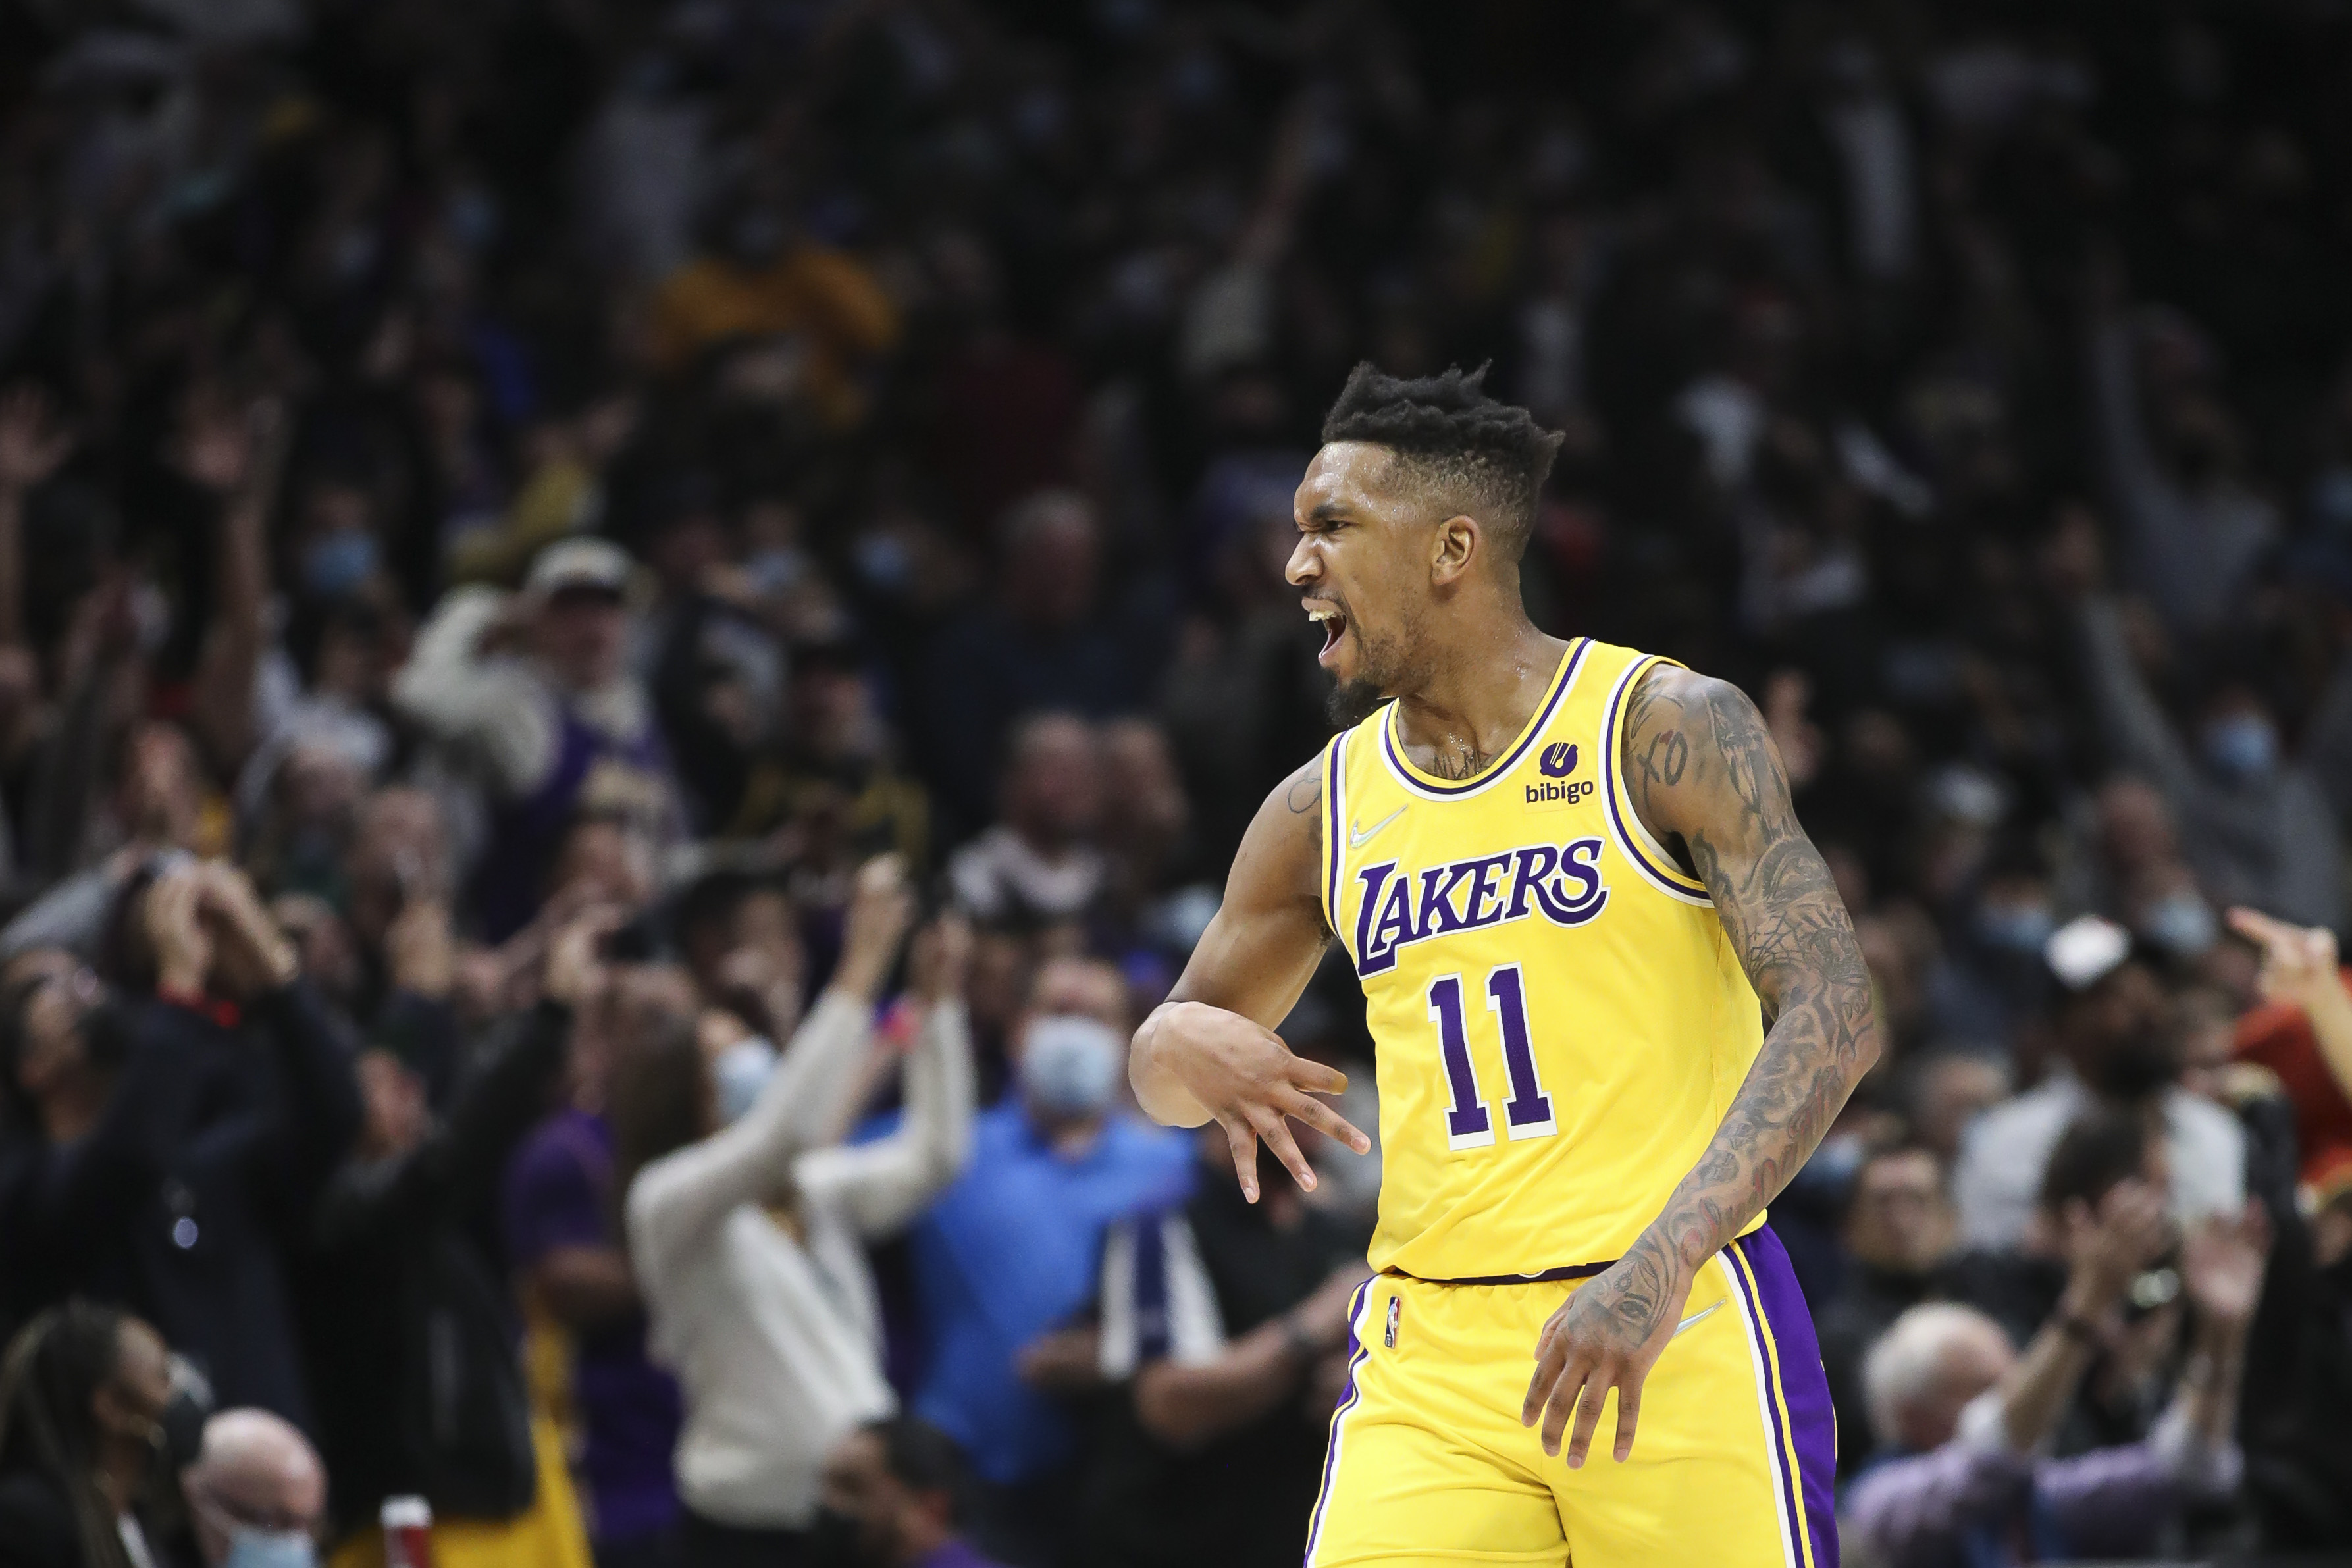 Los Angeles Lakers guard Malik Monk reacts during a game against the LA Clippers in February 2022